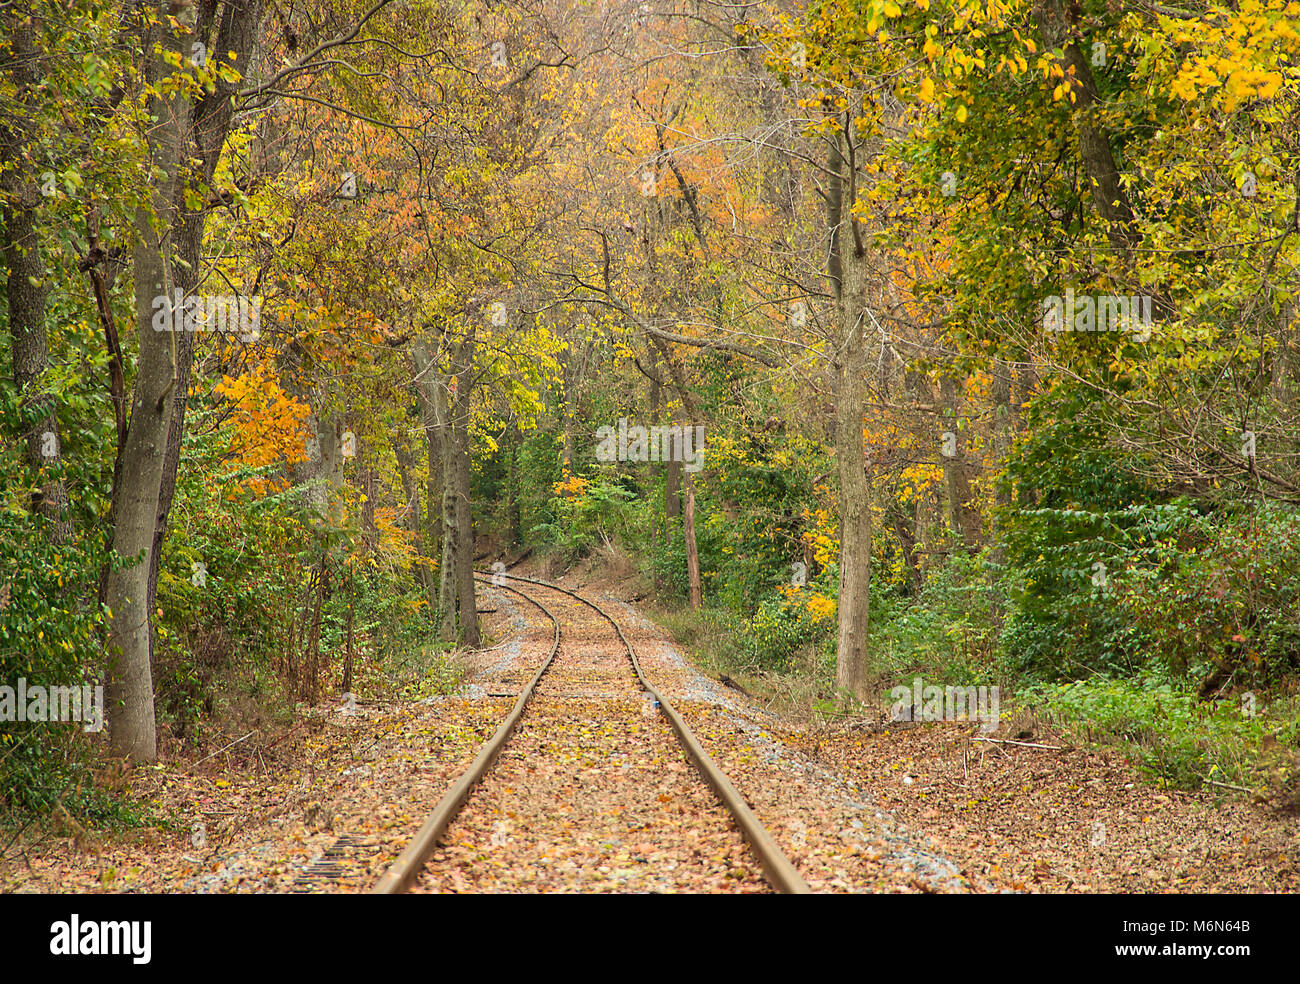 Beautiful fall foliage of orange, yellow and greens boarder an old rail road that is curving throught the tree lined rail bed. Stock Photo